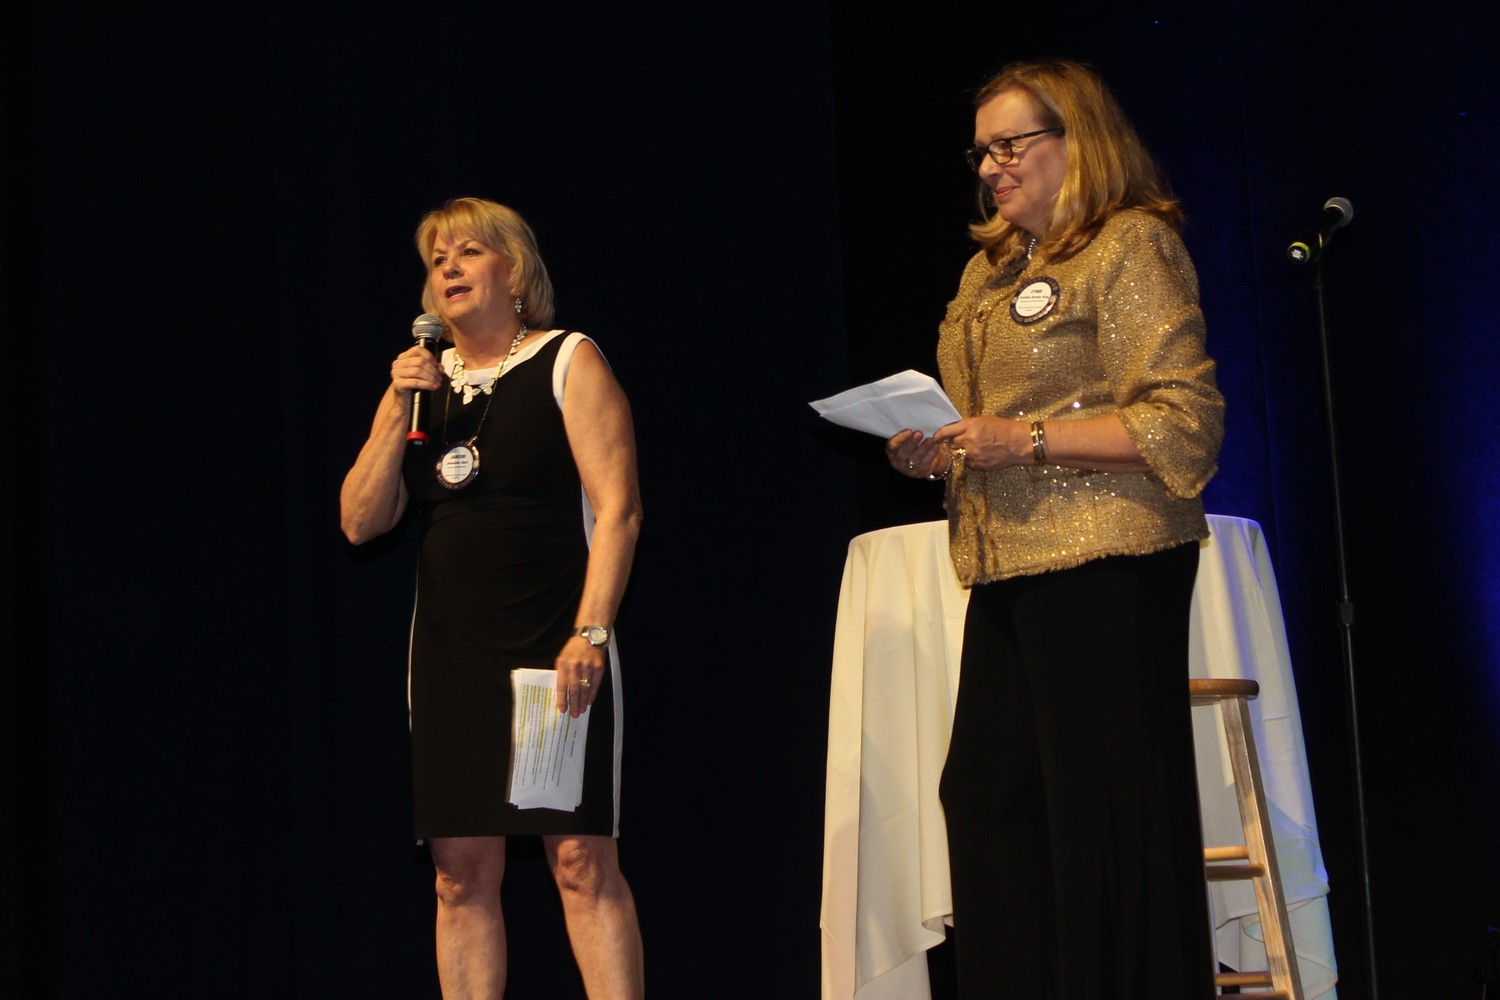 Janeene Hart and Cyndi King of the Rotary Club of Ponte Vedra Beach Sunset address the crowd at the Comedy for a Cause fundraiser.